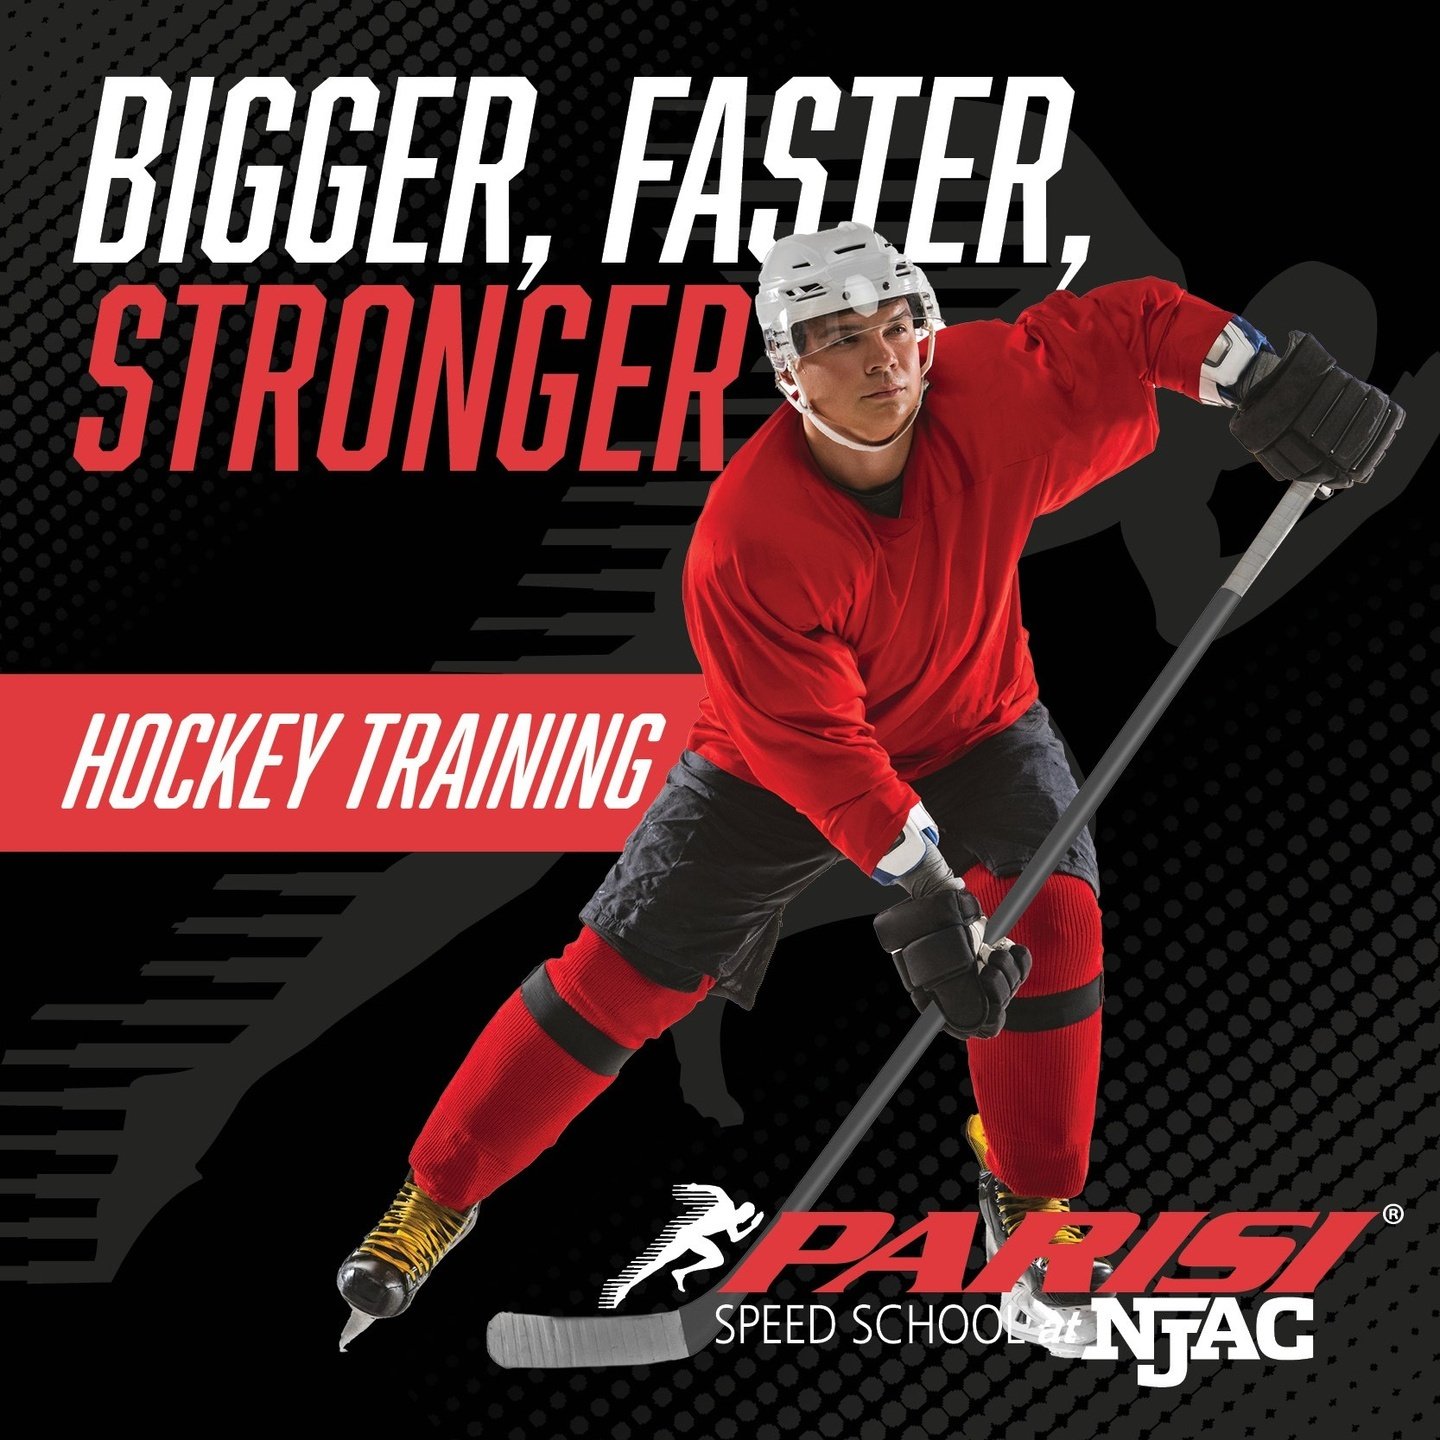 Take your game to the next level with our sports-specific training! Join Parisi Speed School at NJAC to increase speed and agility, perfect your skills, and outperform the competition. Visit Parisi Speed School at NJAC: https://www.njac.com/parisi